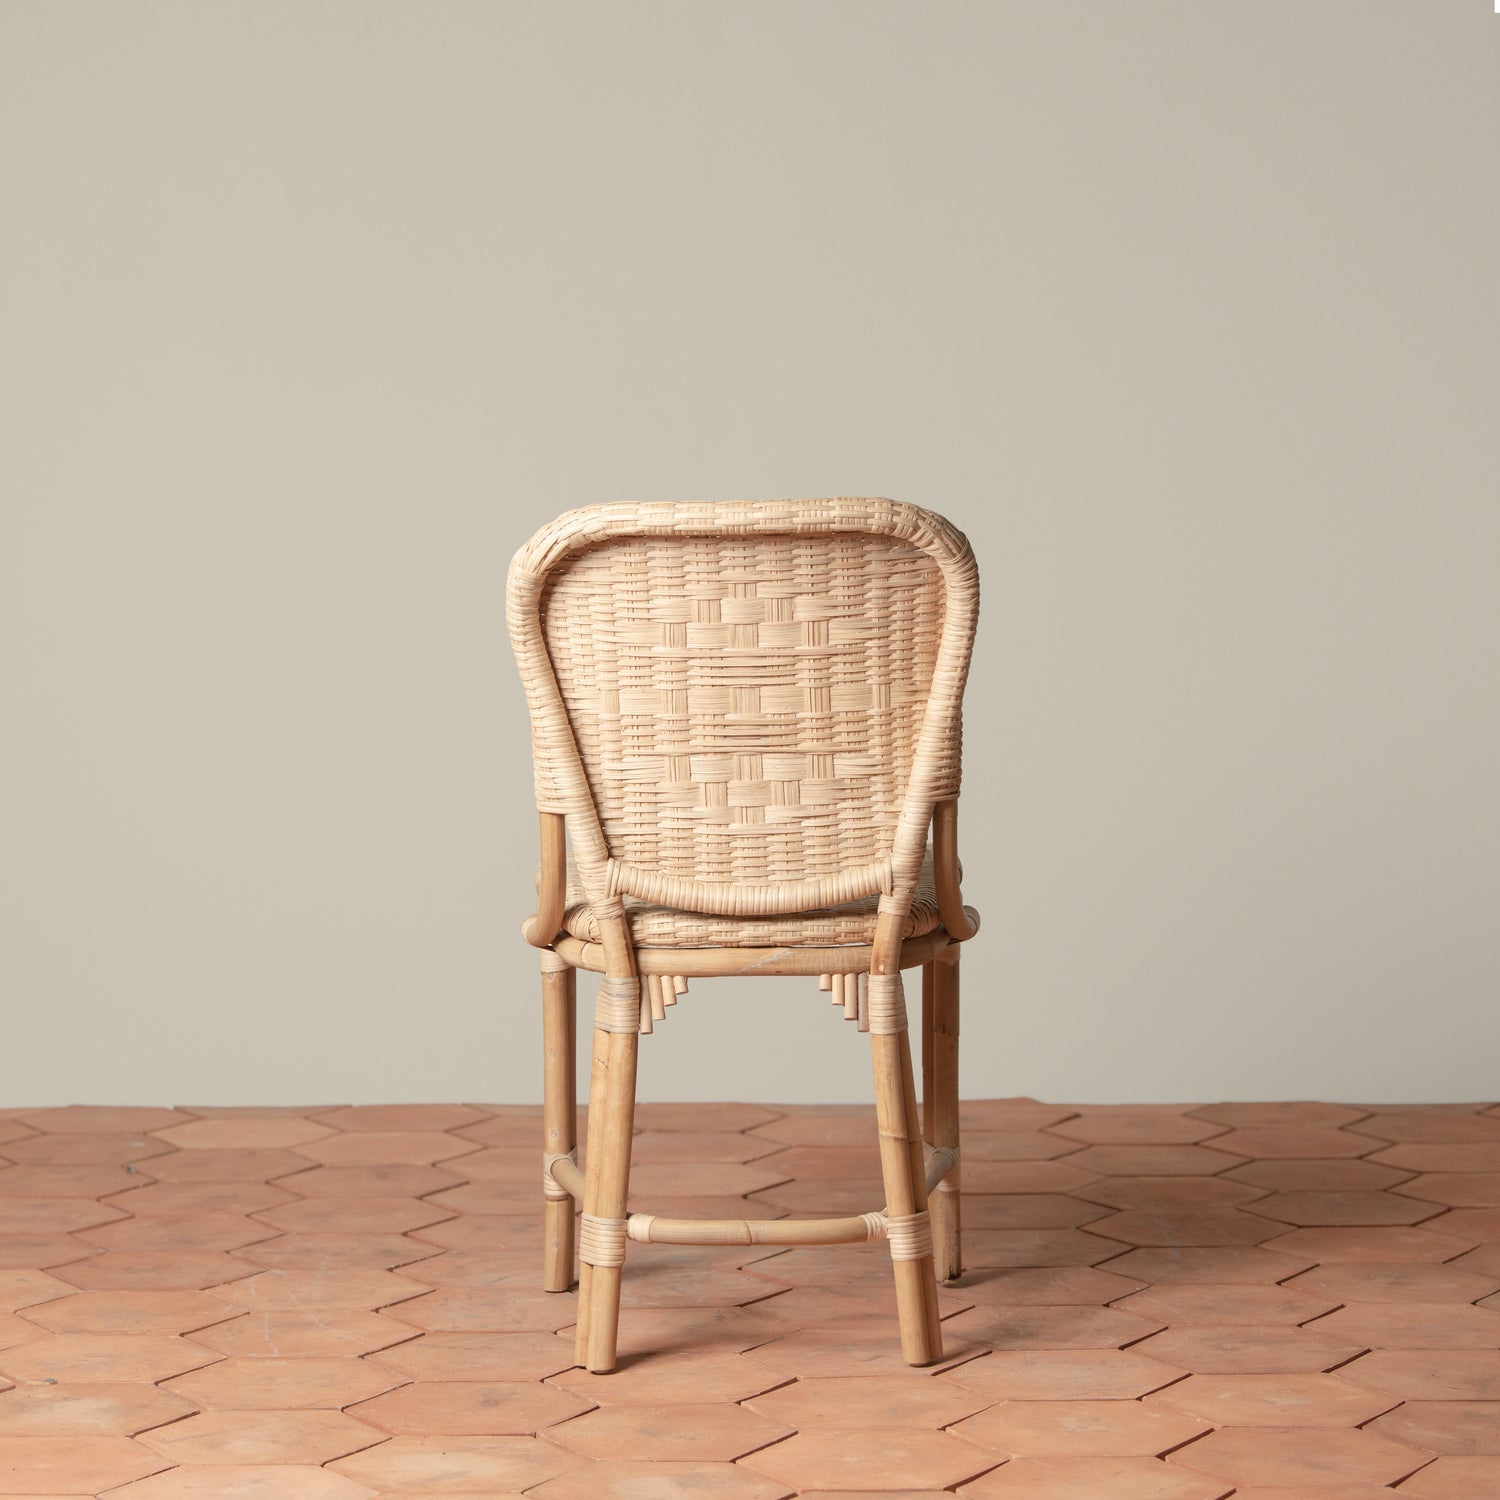 On an ivory background is a rattan chair with a woven rattan seat and backrest.